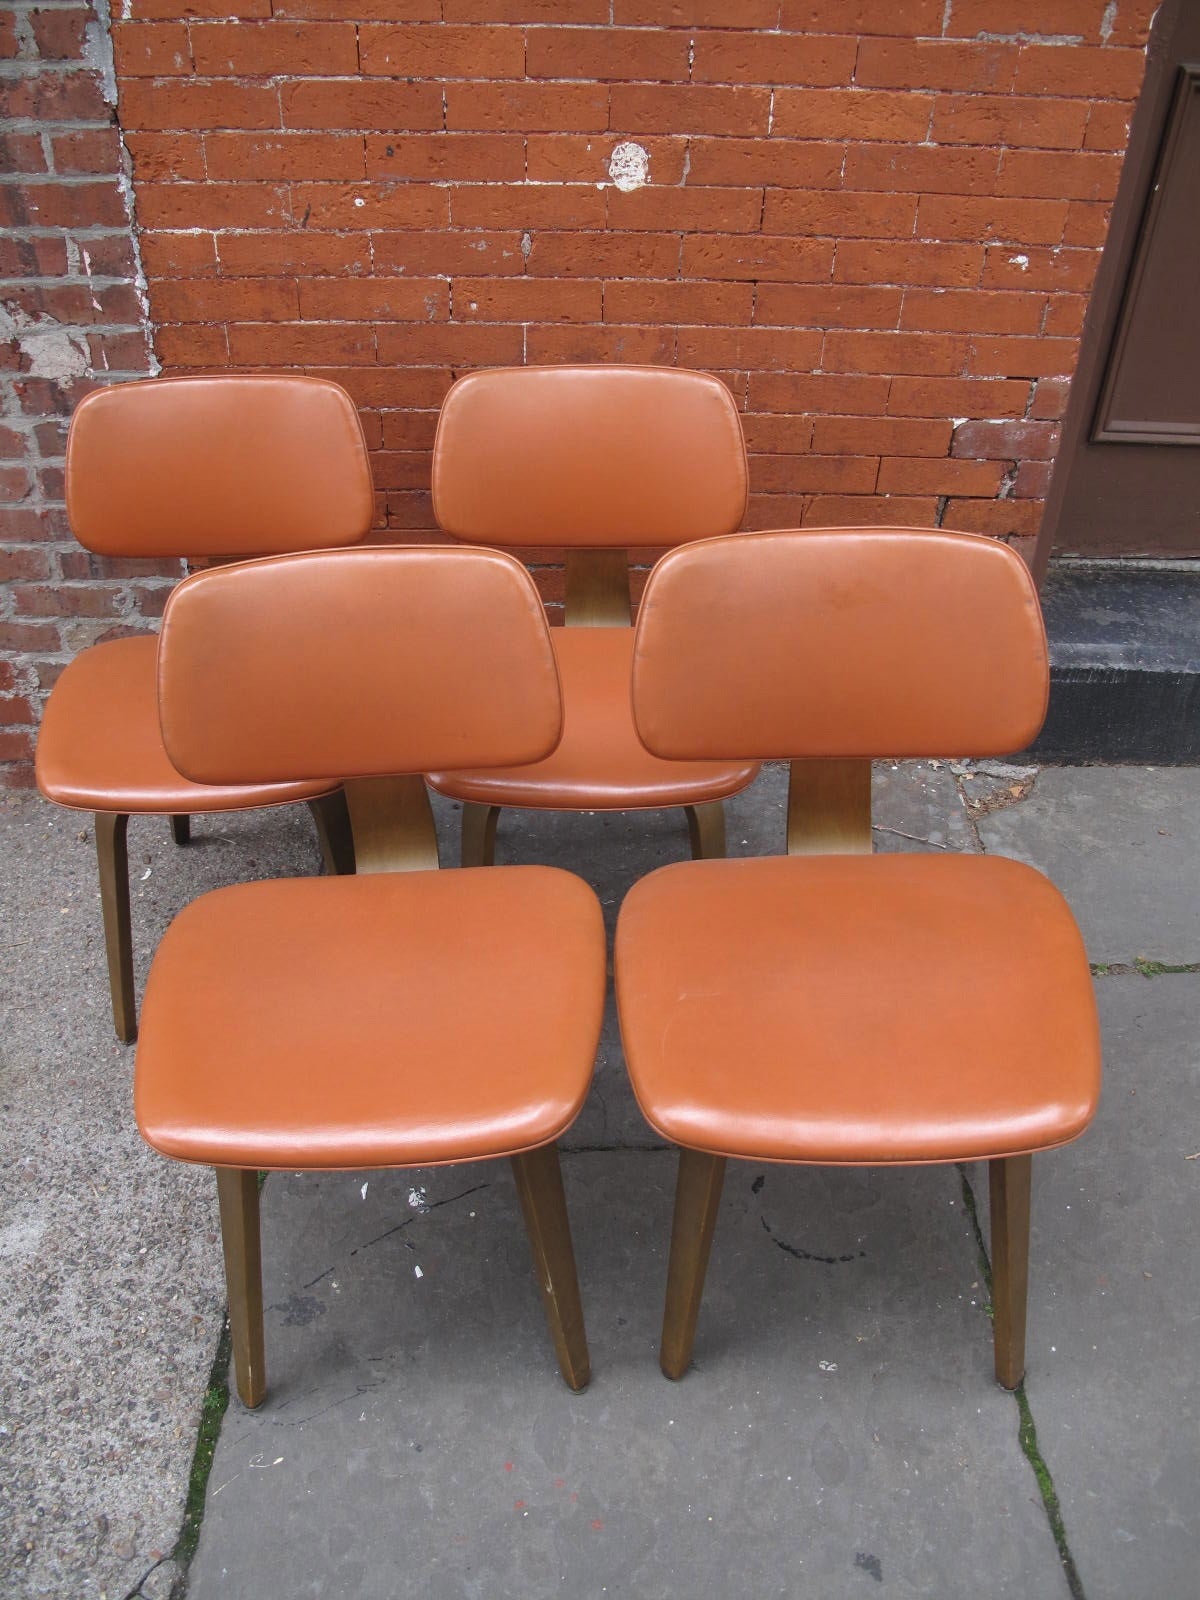 Four Thonet dining chairs in teak and original leather.